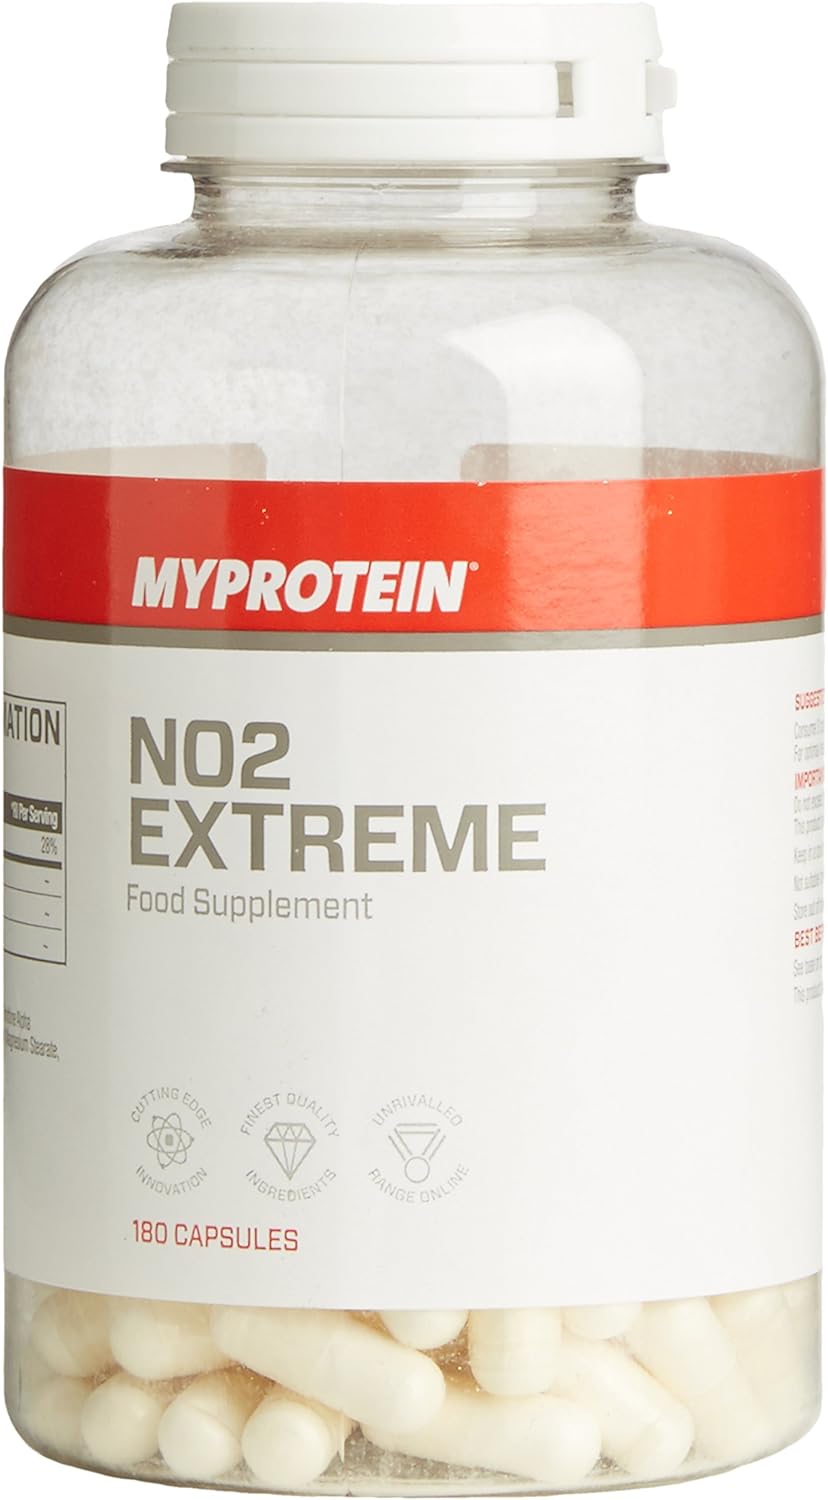 4. MyProtein NO2 Extreme Capsules - Pack of 180